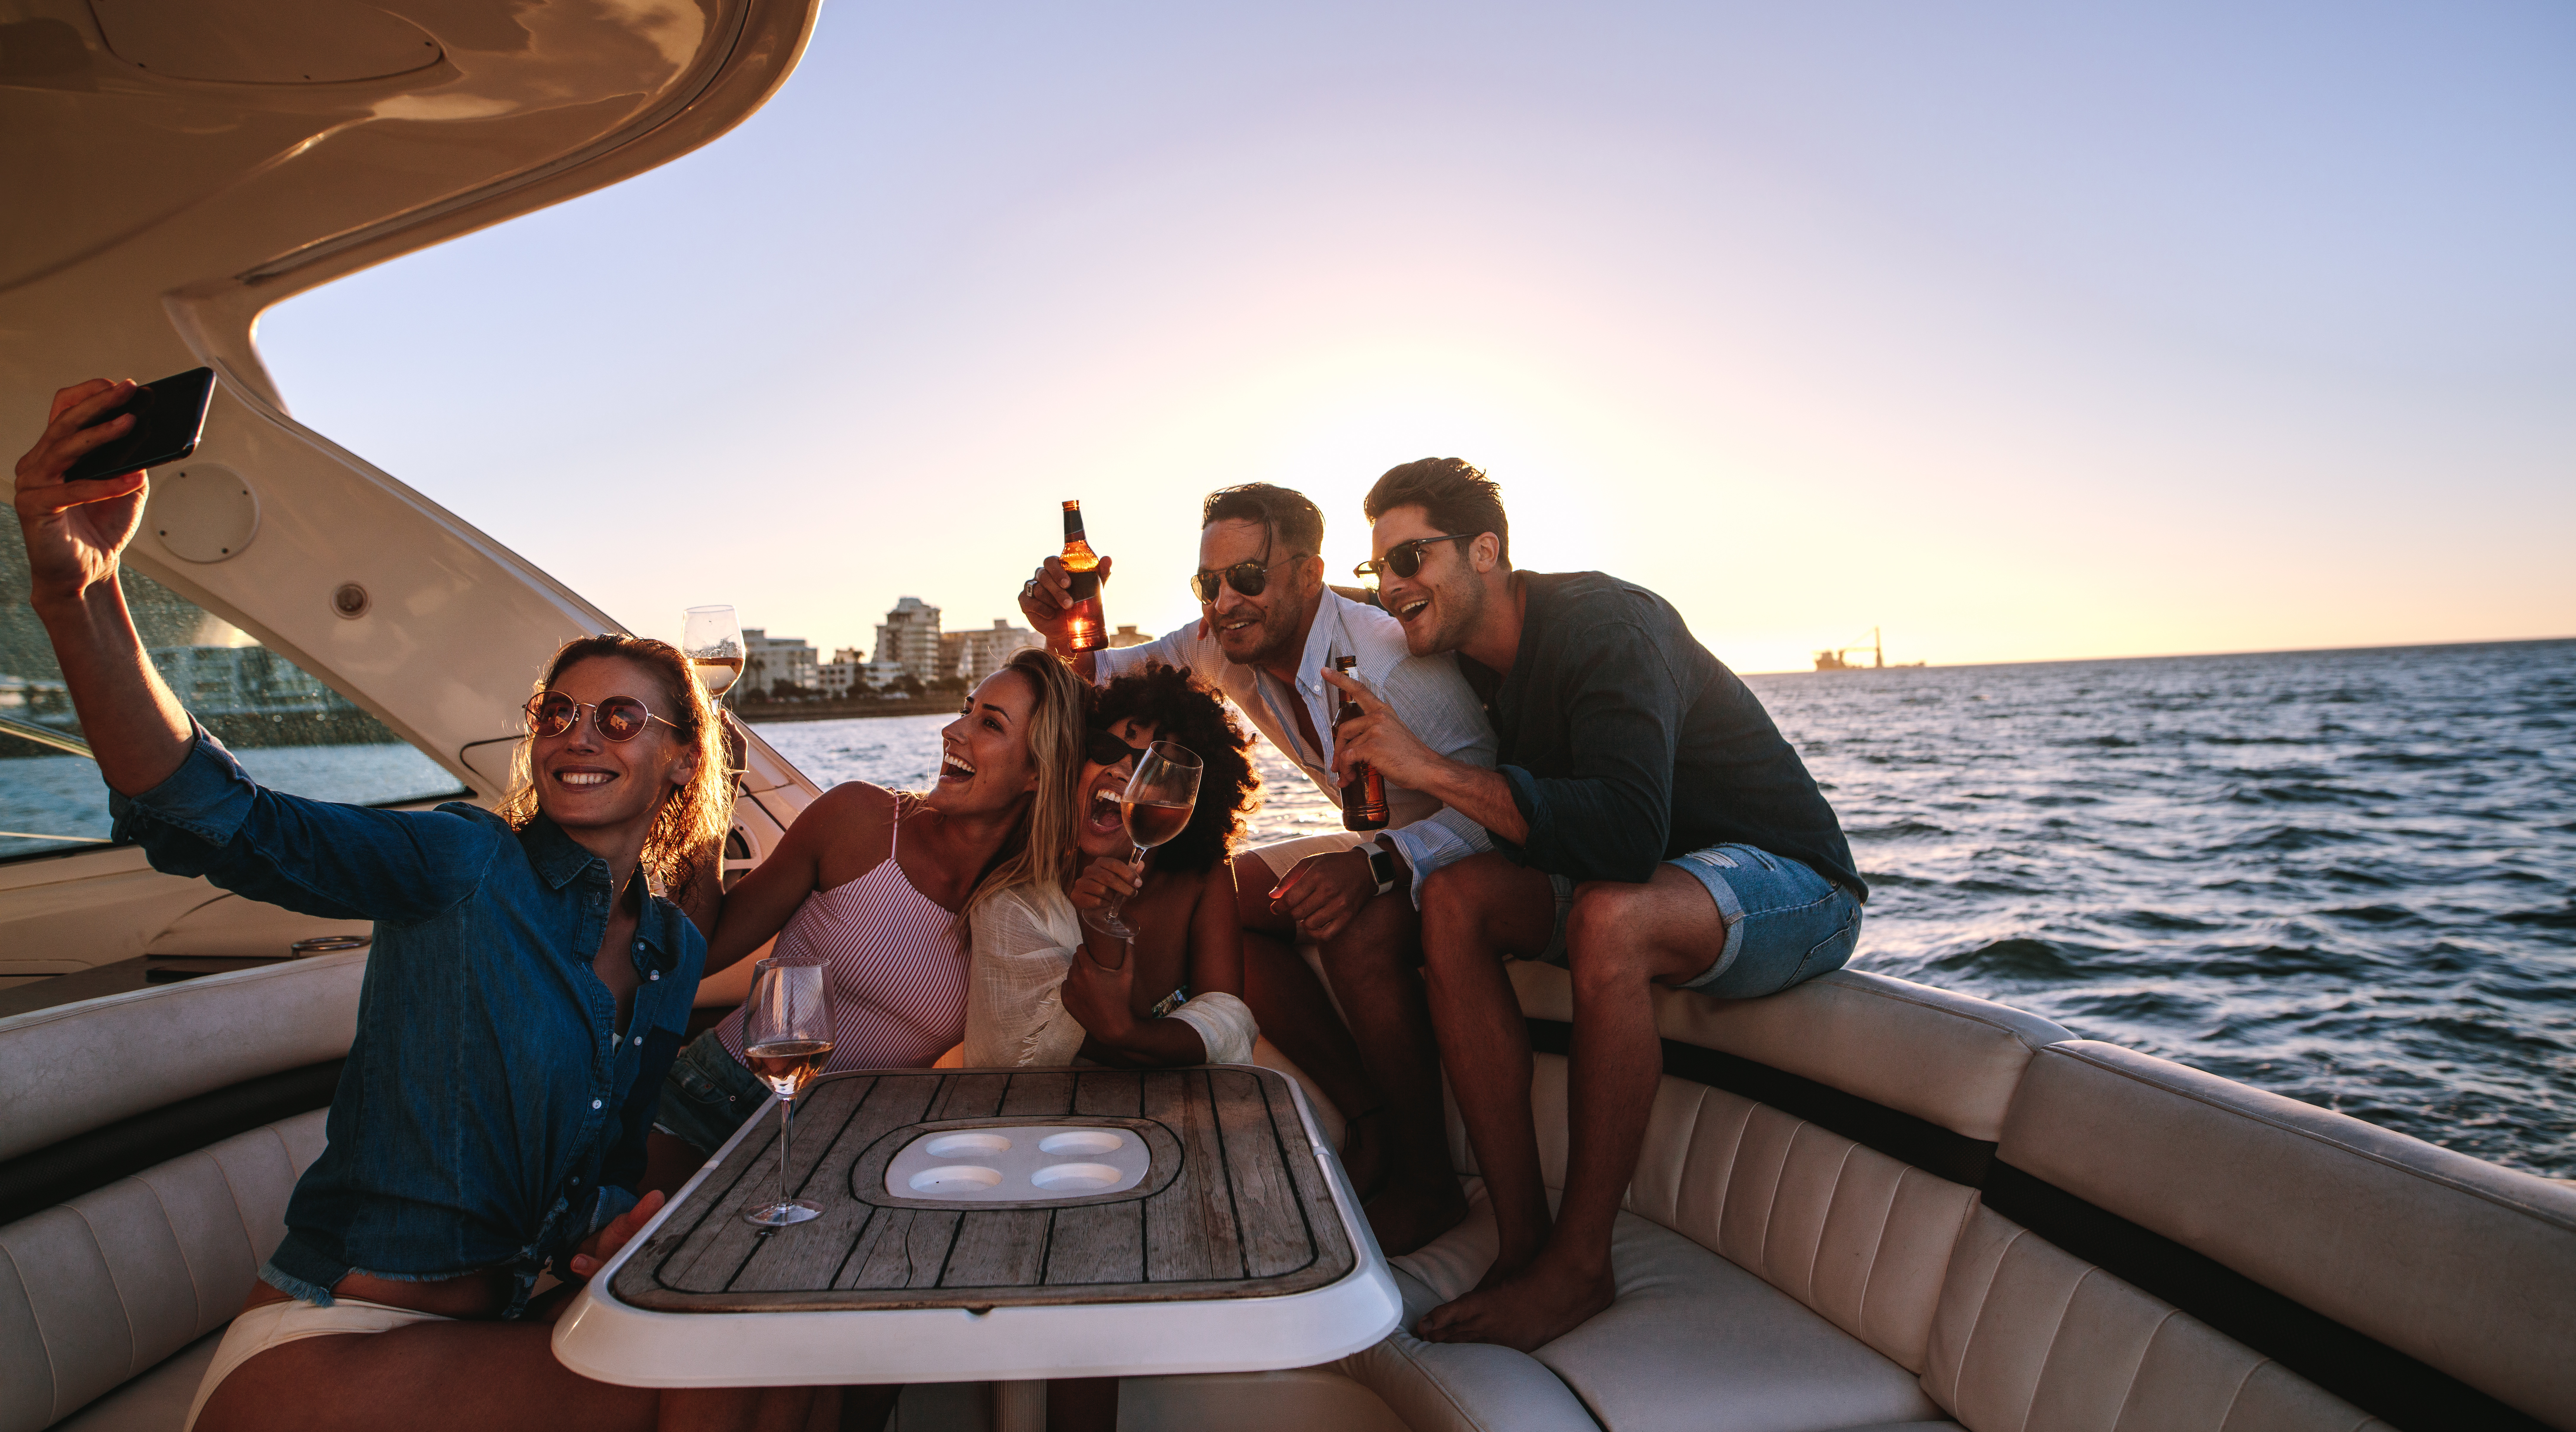 Boating Under the Influence ticket attorney springfield mo